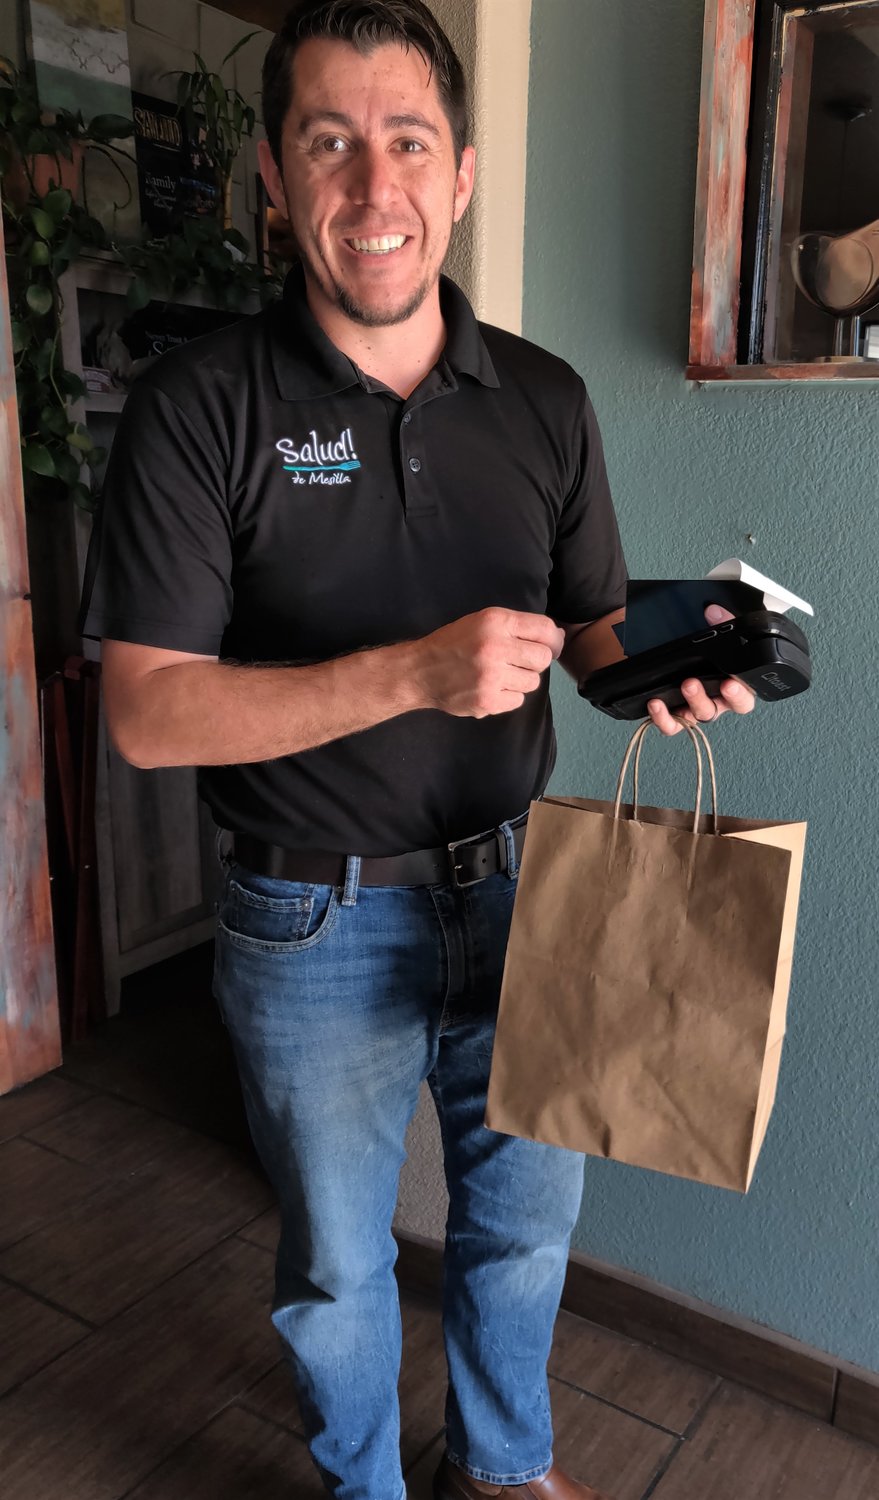 Russell Hernandez, co-owner of Salud! de Mesilla, hands an eco-friendly brown, paper bag to a customer who ordered ahead. Salud! and other restaurants are making to-go orders sustainable during the COVID-19 transition.